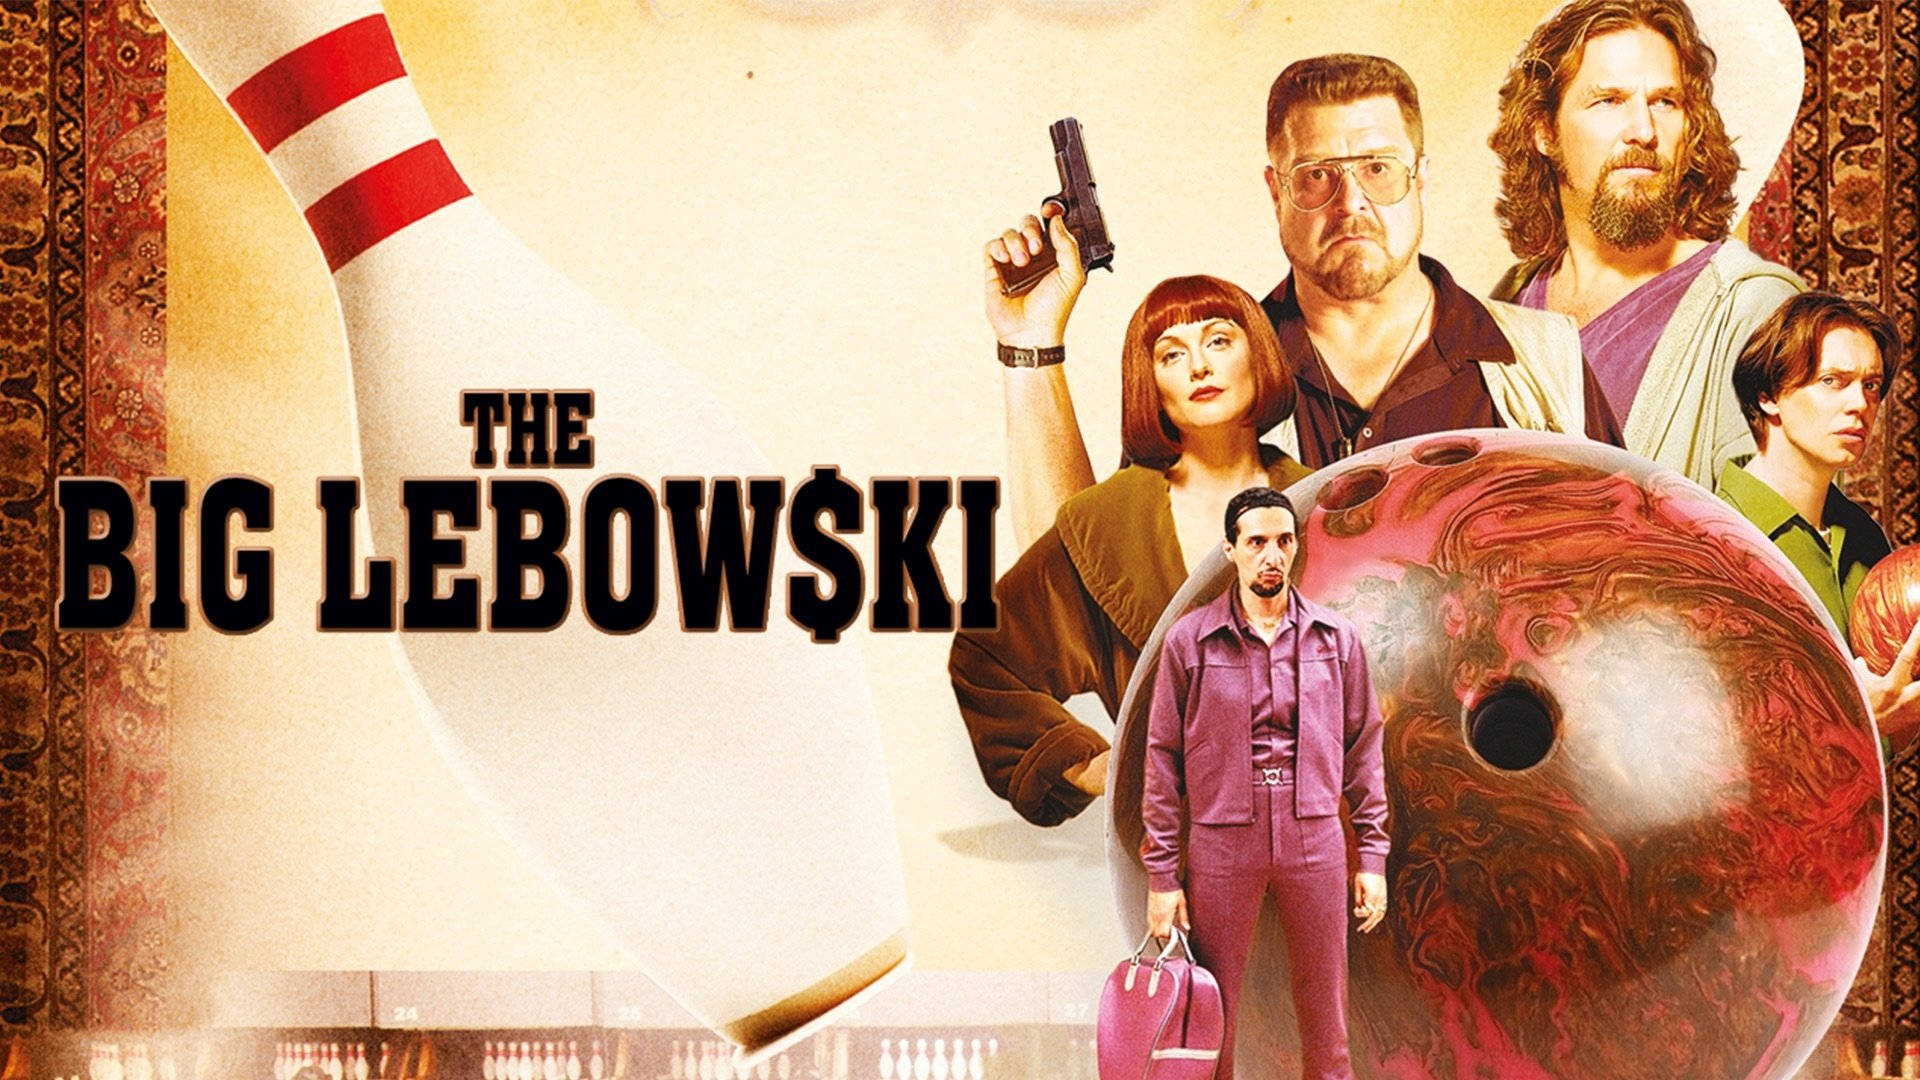 Iconic Movie Poster Of The Big Lebowski Featuring Main Characters. Background